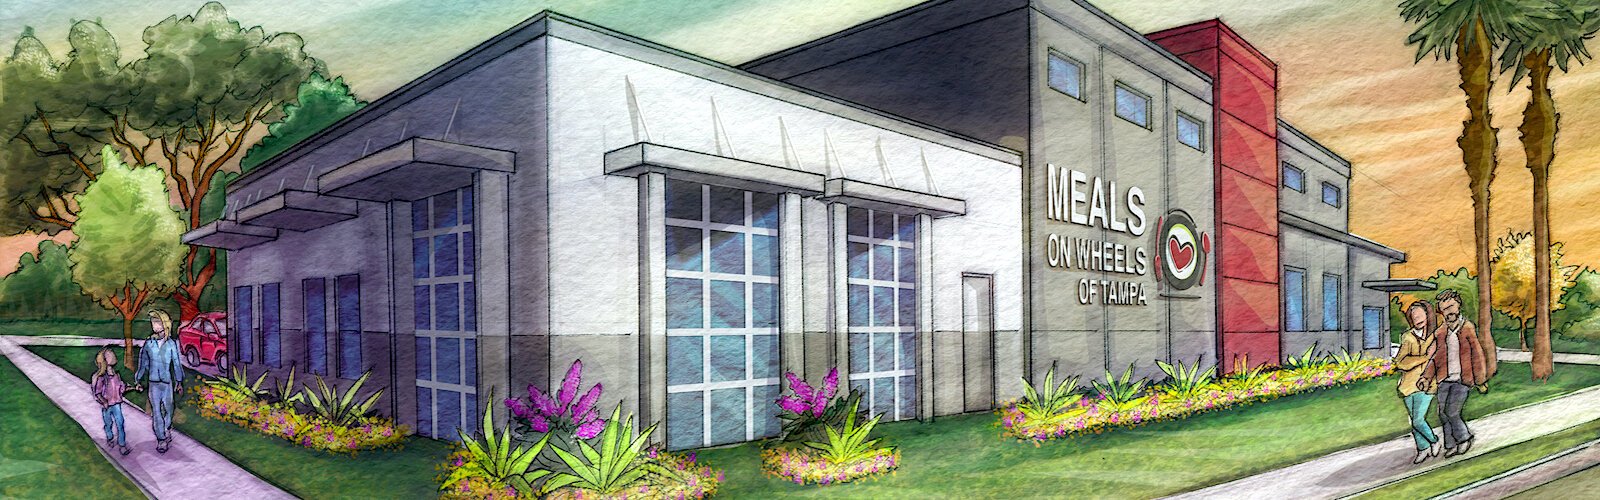 JVB Architect, LLC and Azzarelli Builders are partnering with Meals on Wheels Tampa for a major expansion project.